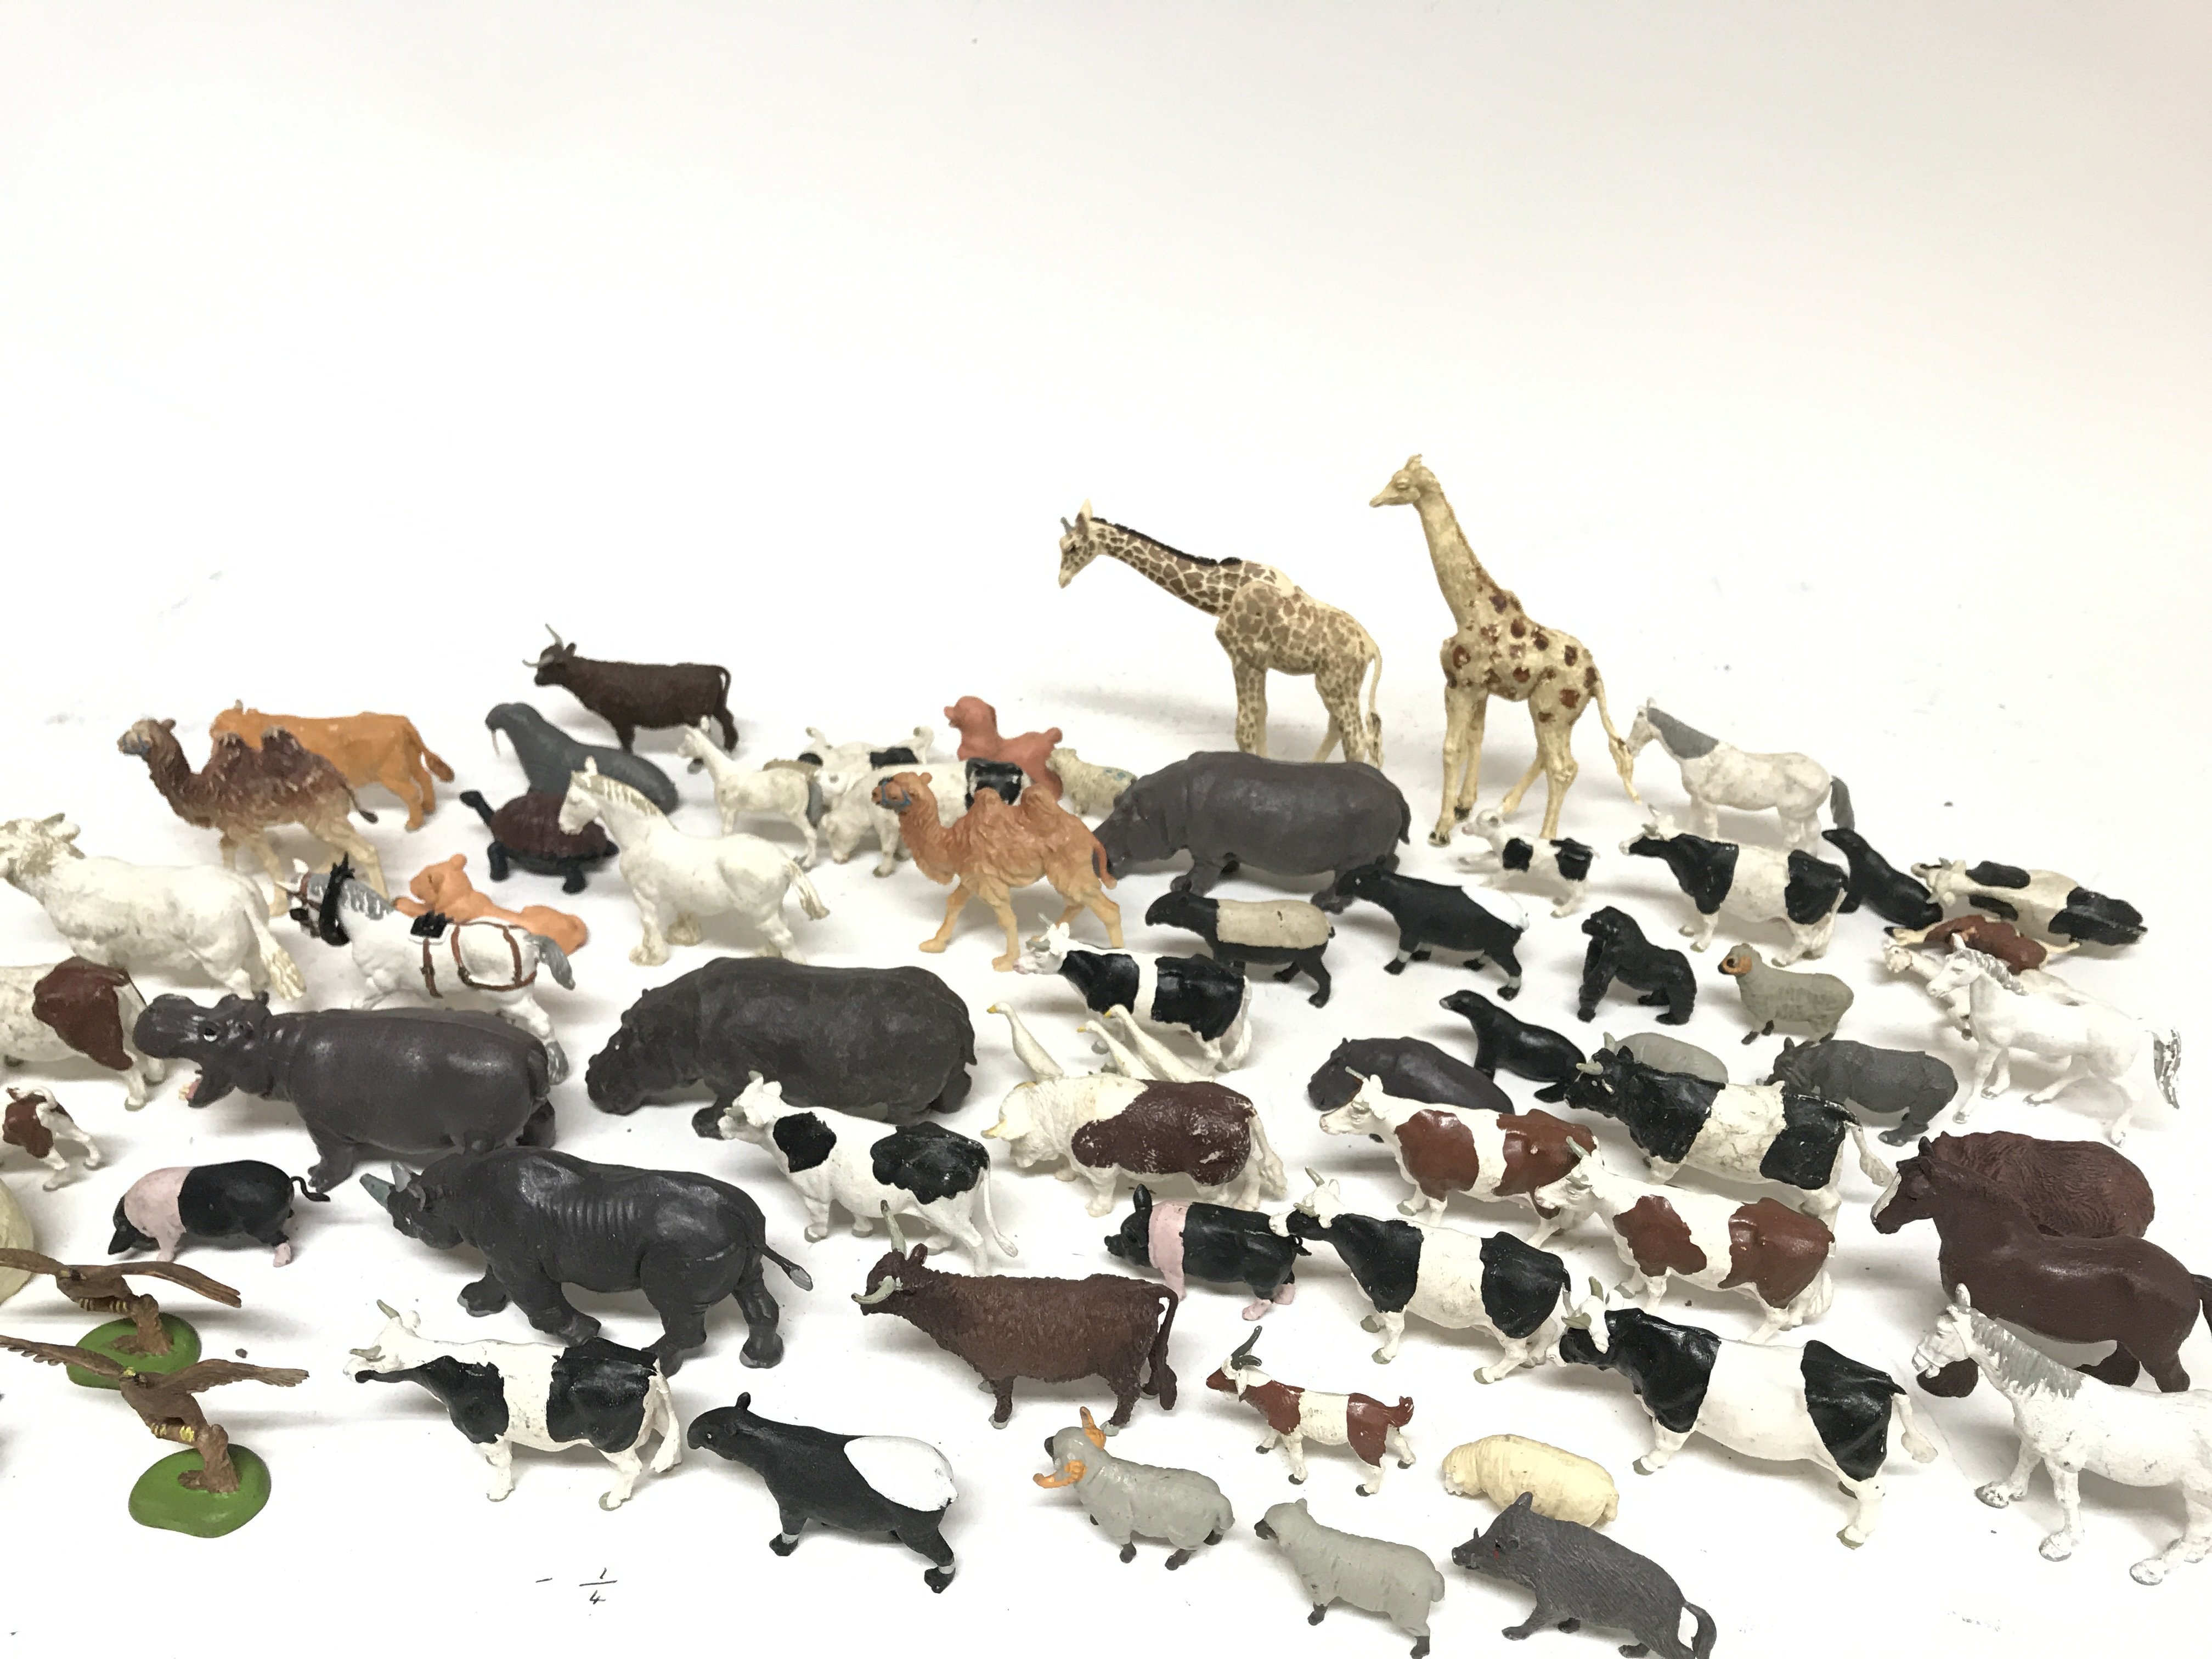 A box containing a collection of plastic animals.